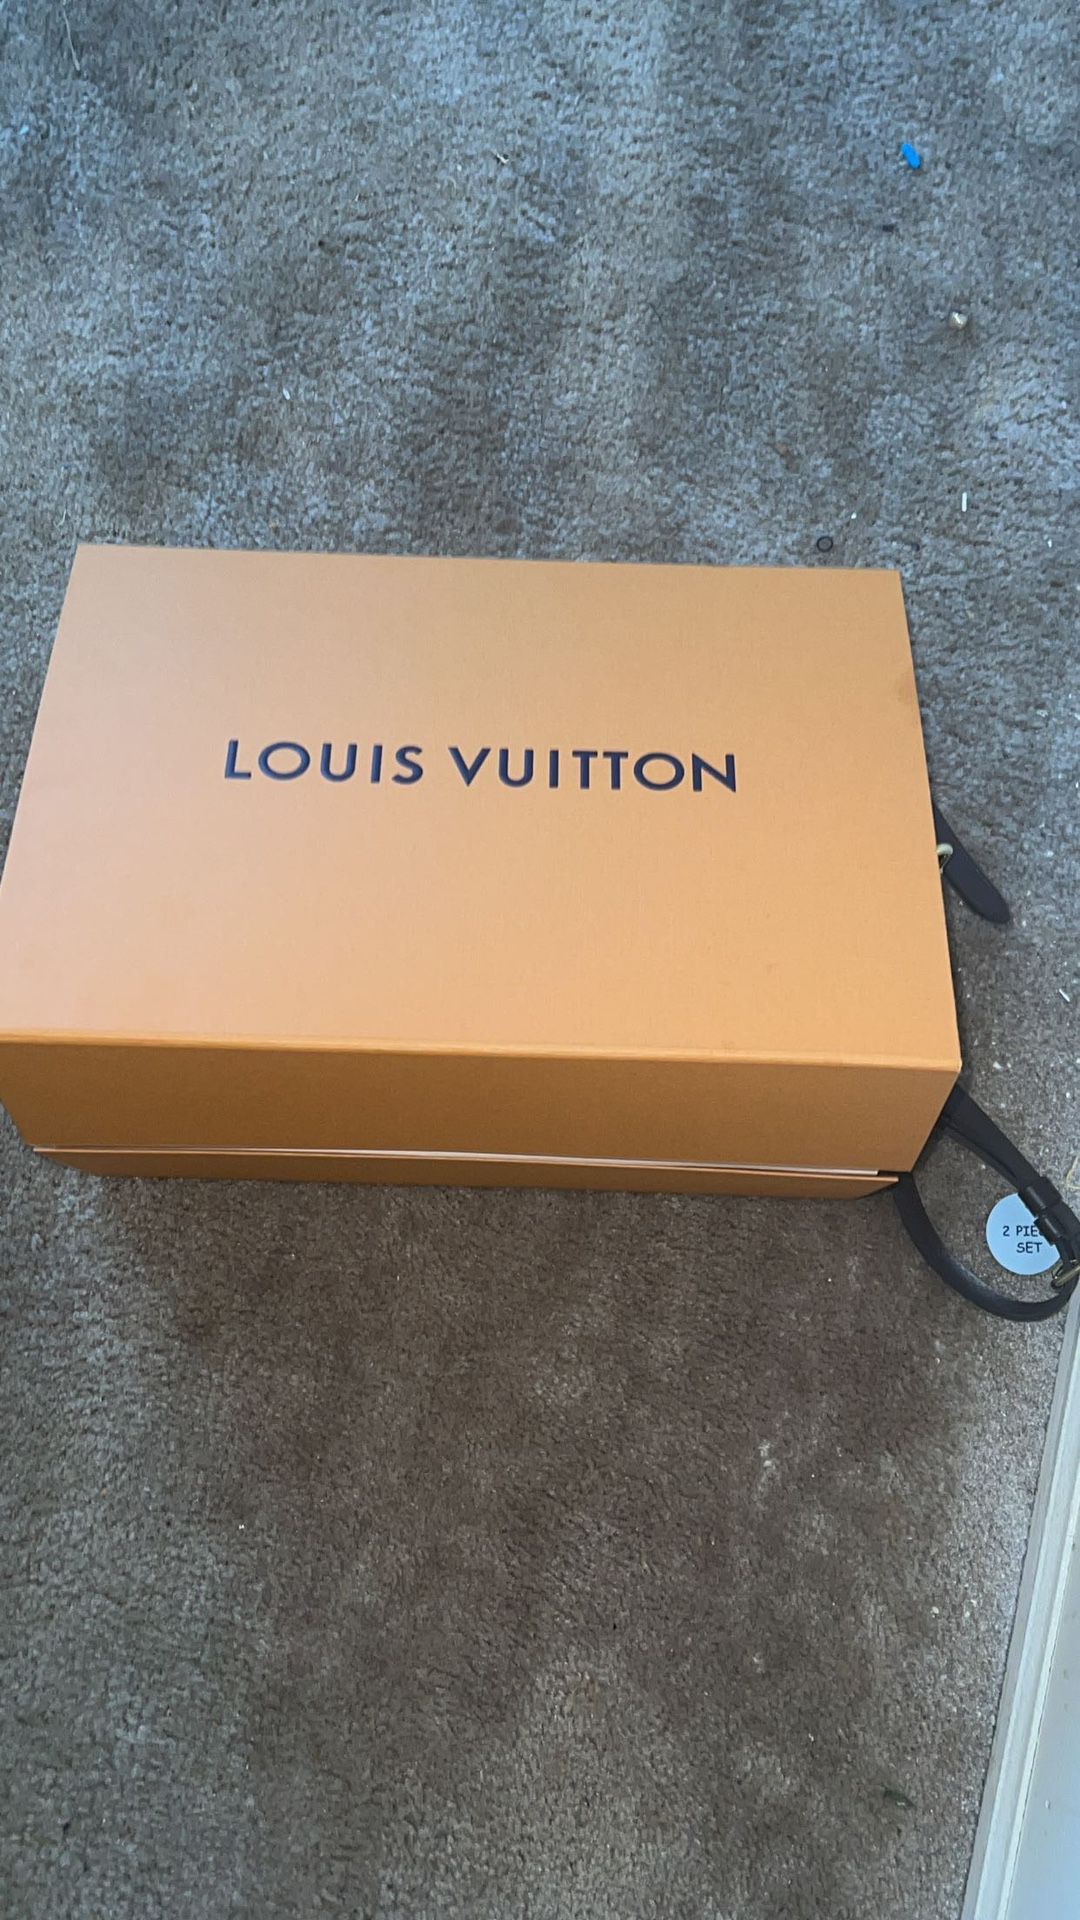 nordstrom used louis vuittons